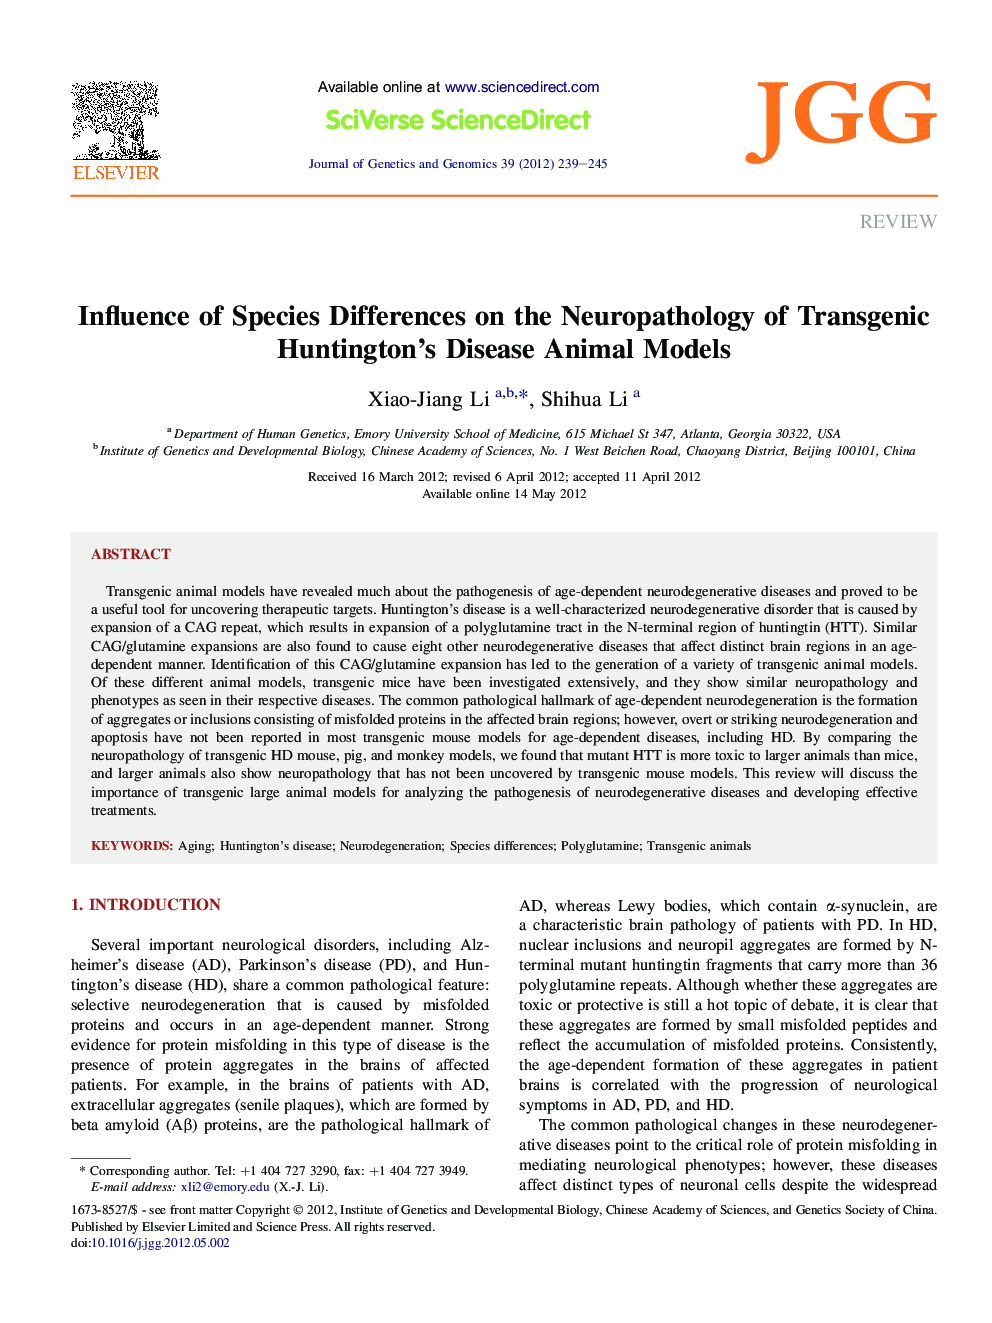 Influence of Species Differences on the Neuropathology of Transgenic Huntington's Disease Animal Models